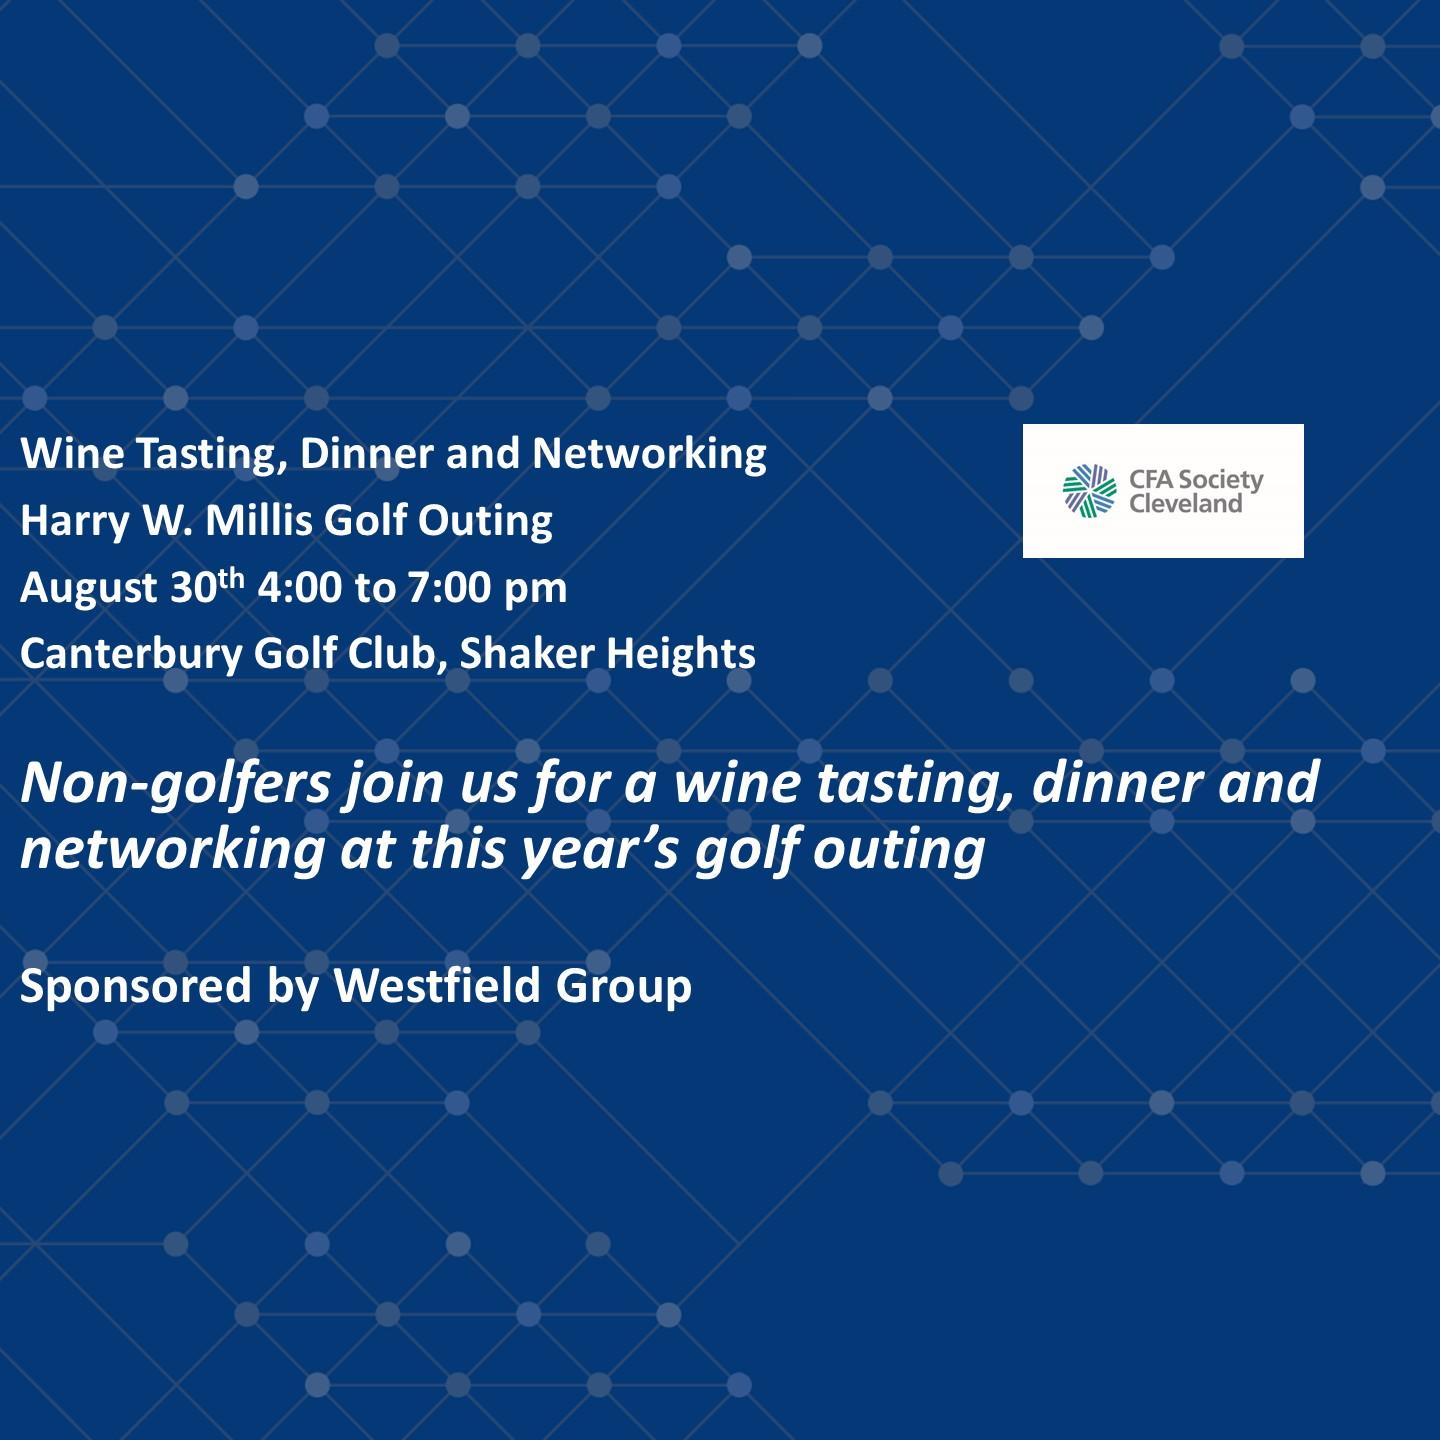 Wine Tasting and Dinner for Non-Golfers at CFA Cleveland Golf Outing